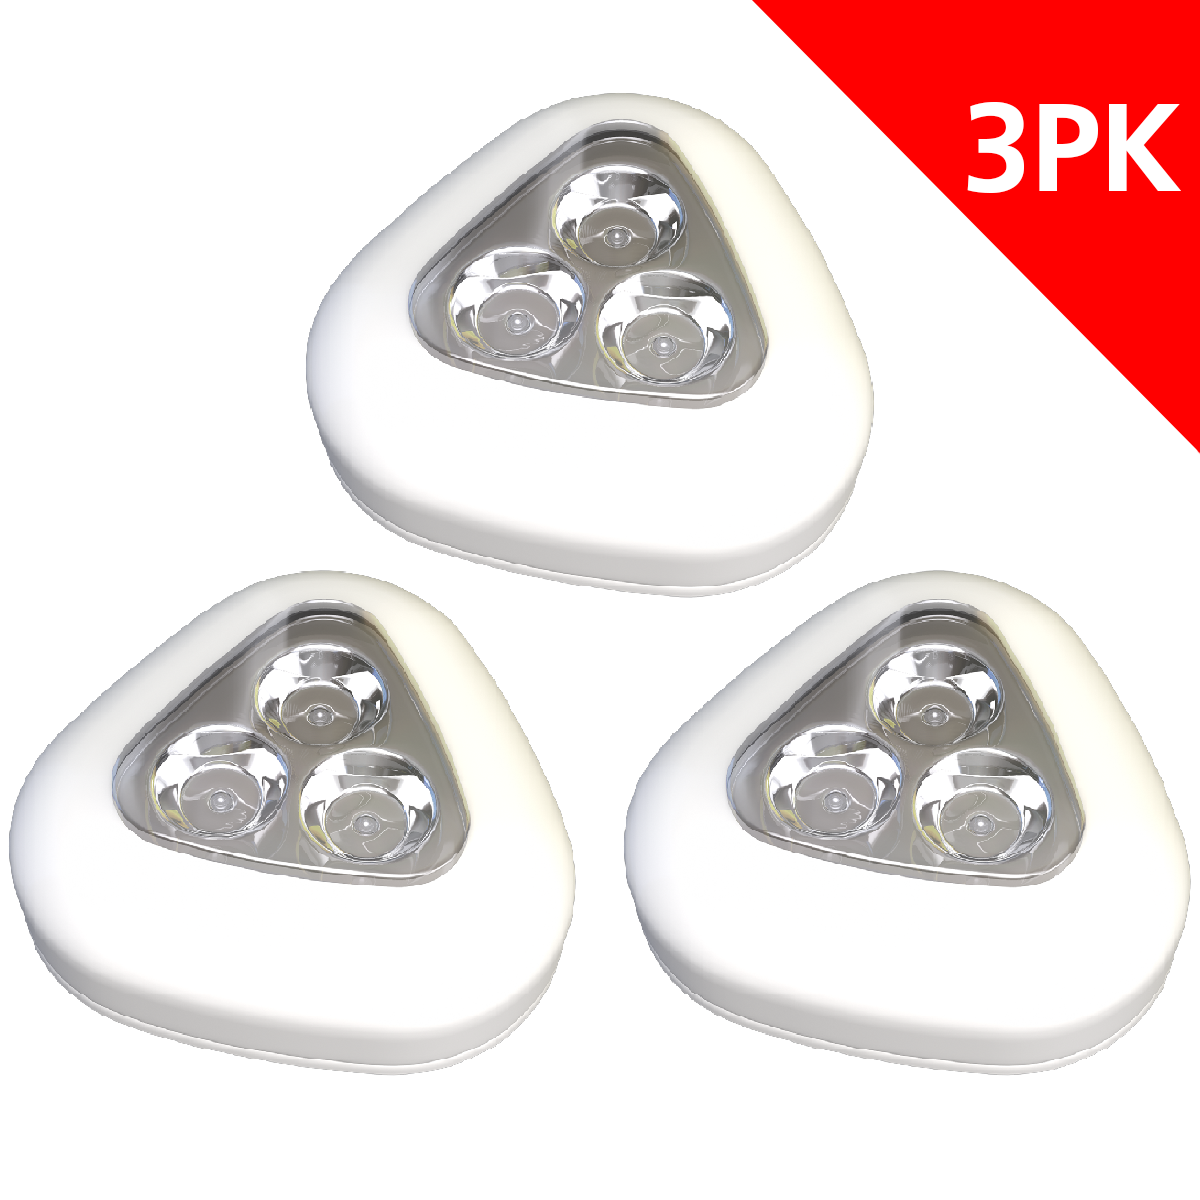 STANLEY 3-LED PUSH LIGHT (3PK) - Stanley Electrical Accessories